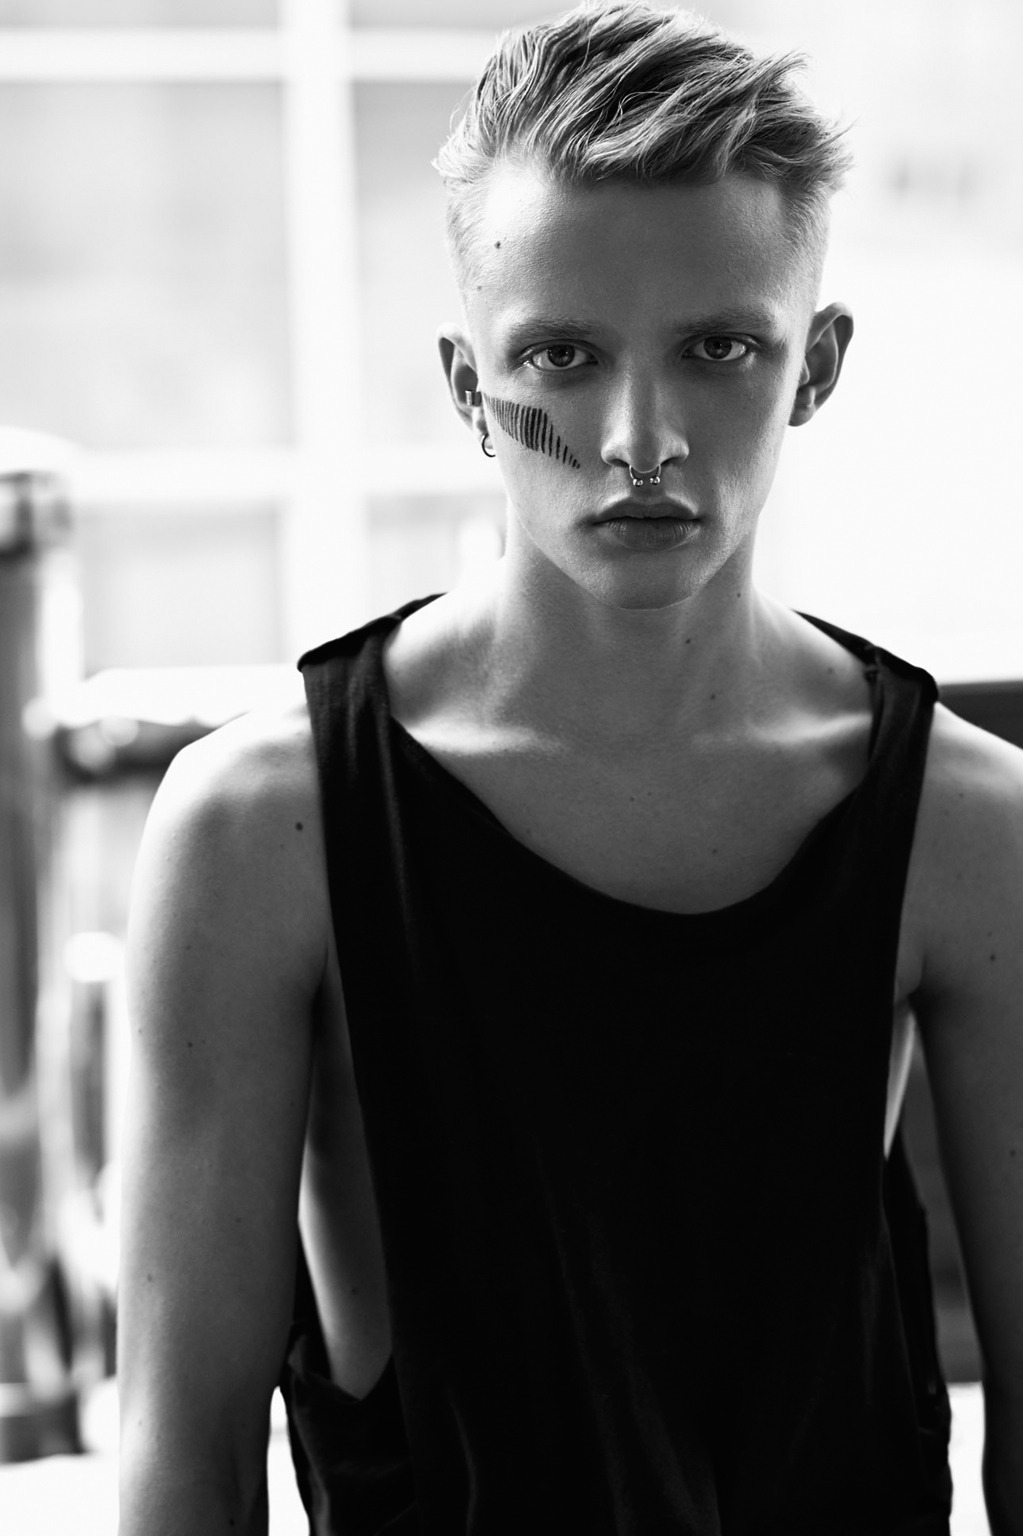 justdropithere:
“Valters Medenis by Edd Horder - i-D Pre-Fall 2014
”